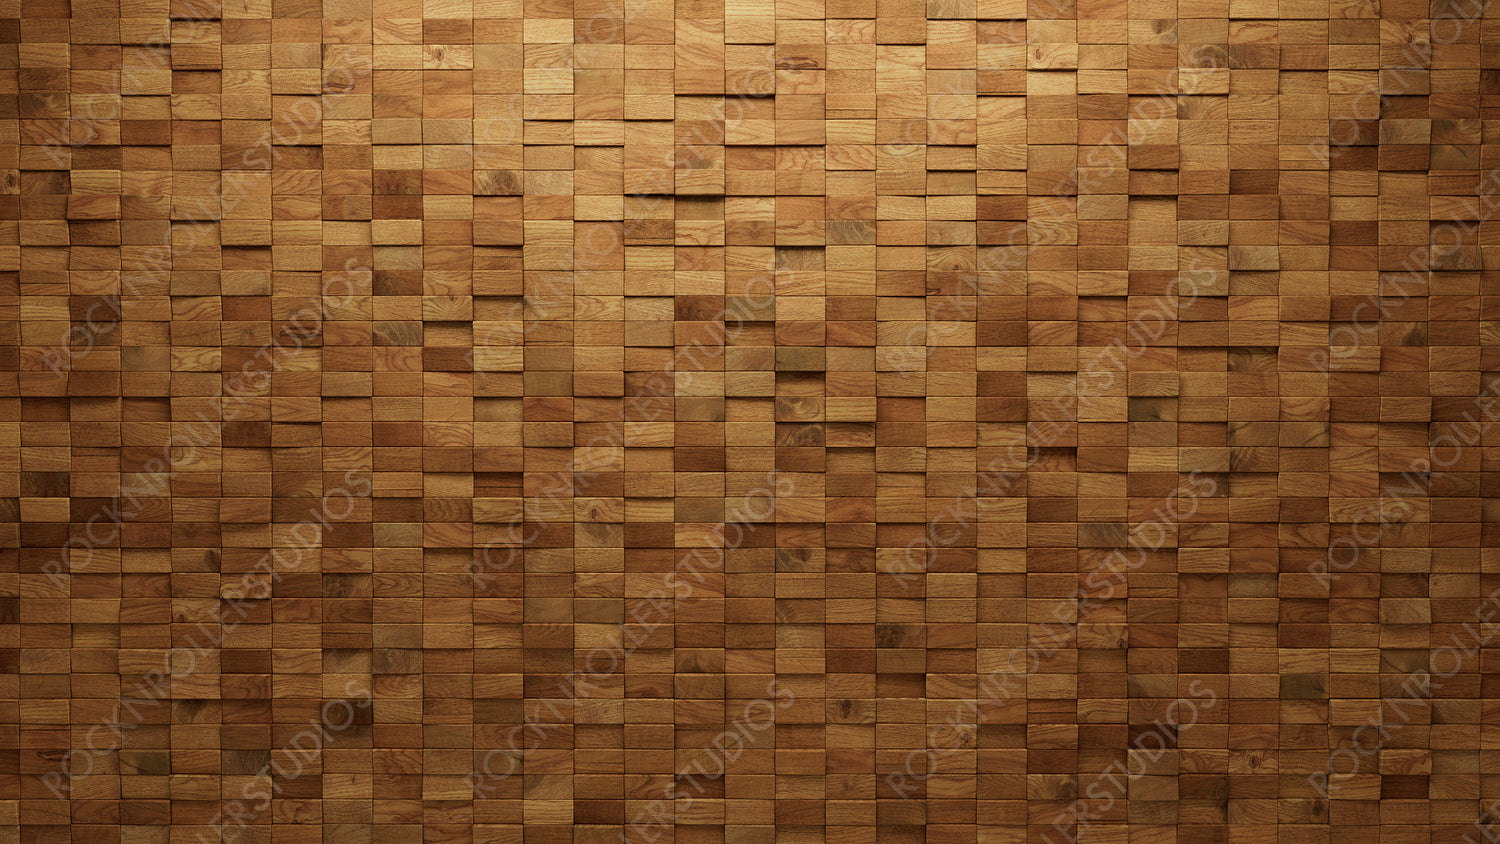 3D, Soft sheen Mosaic Tiles arranged in the shape of a wall. Wood, Timber, Blocks stacked to create a Rectangular block background. 3D Render